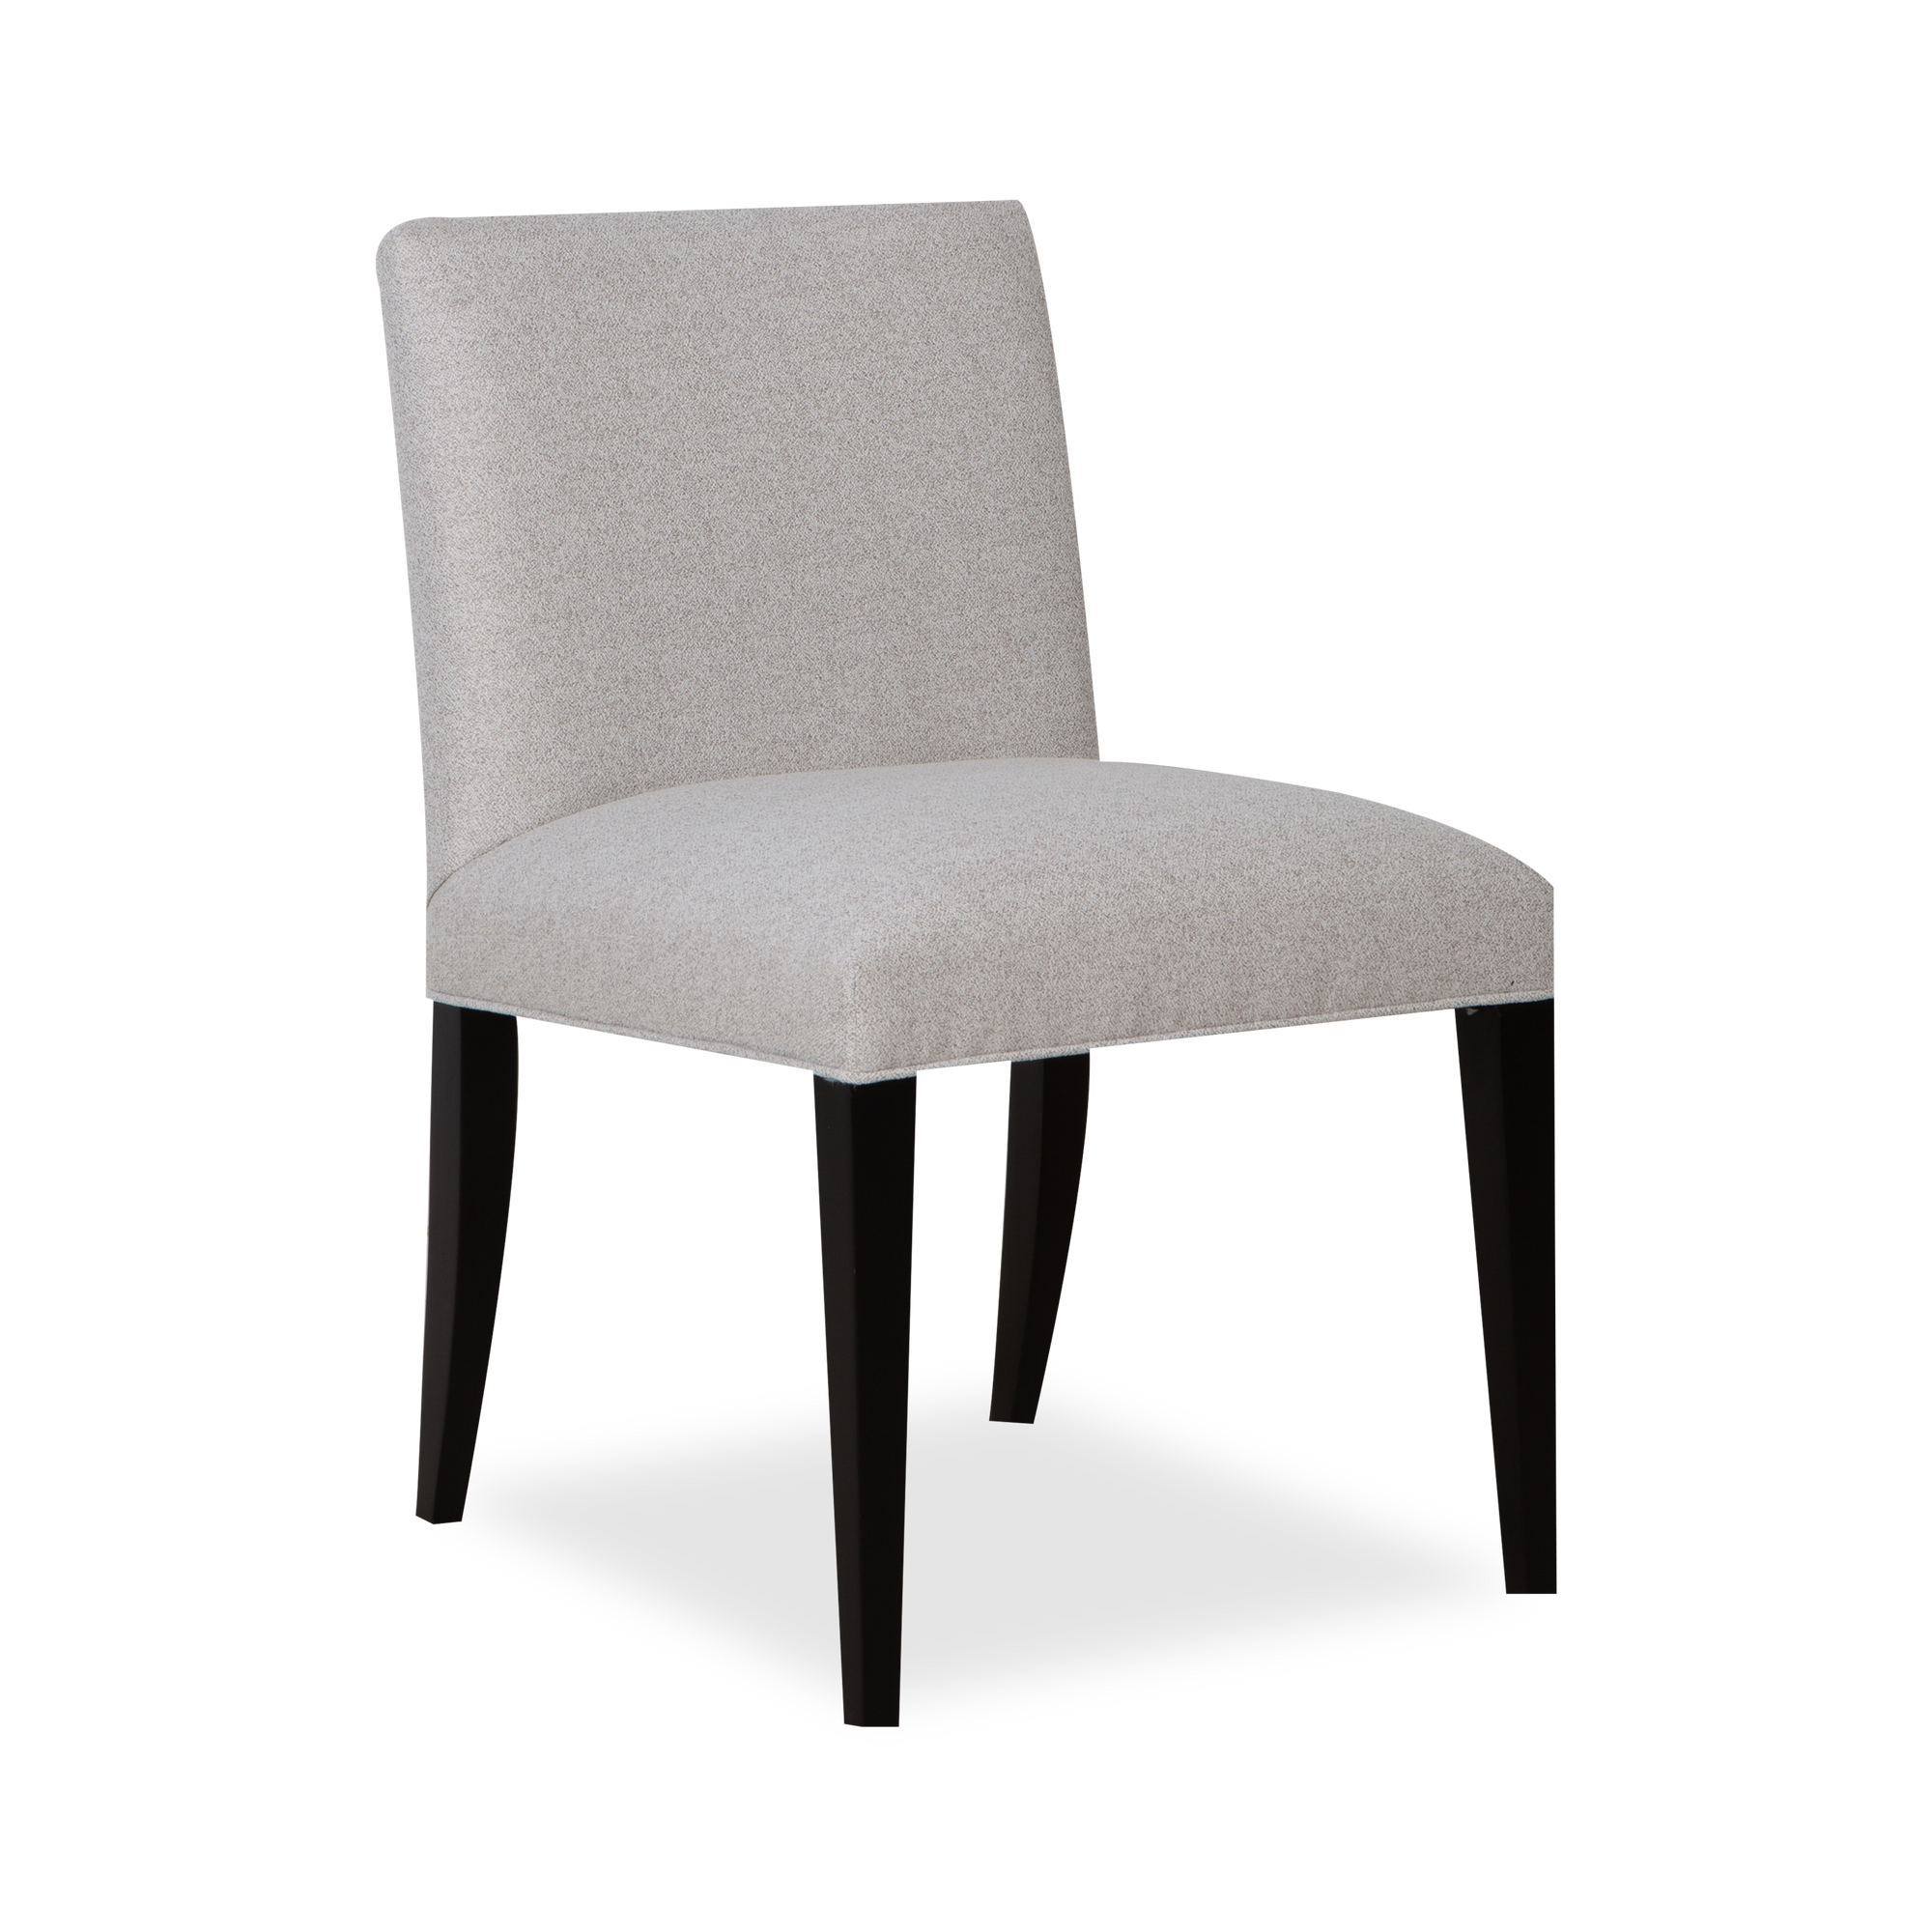 A simple and minimal form combines with modern ivory-coloured upholstery in this essential modern dining chair.